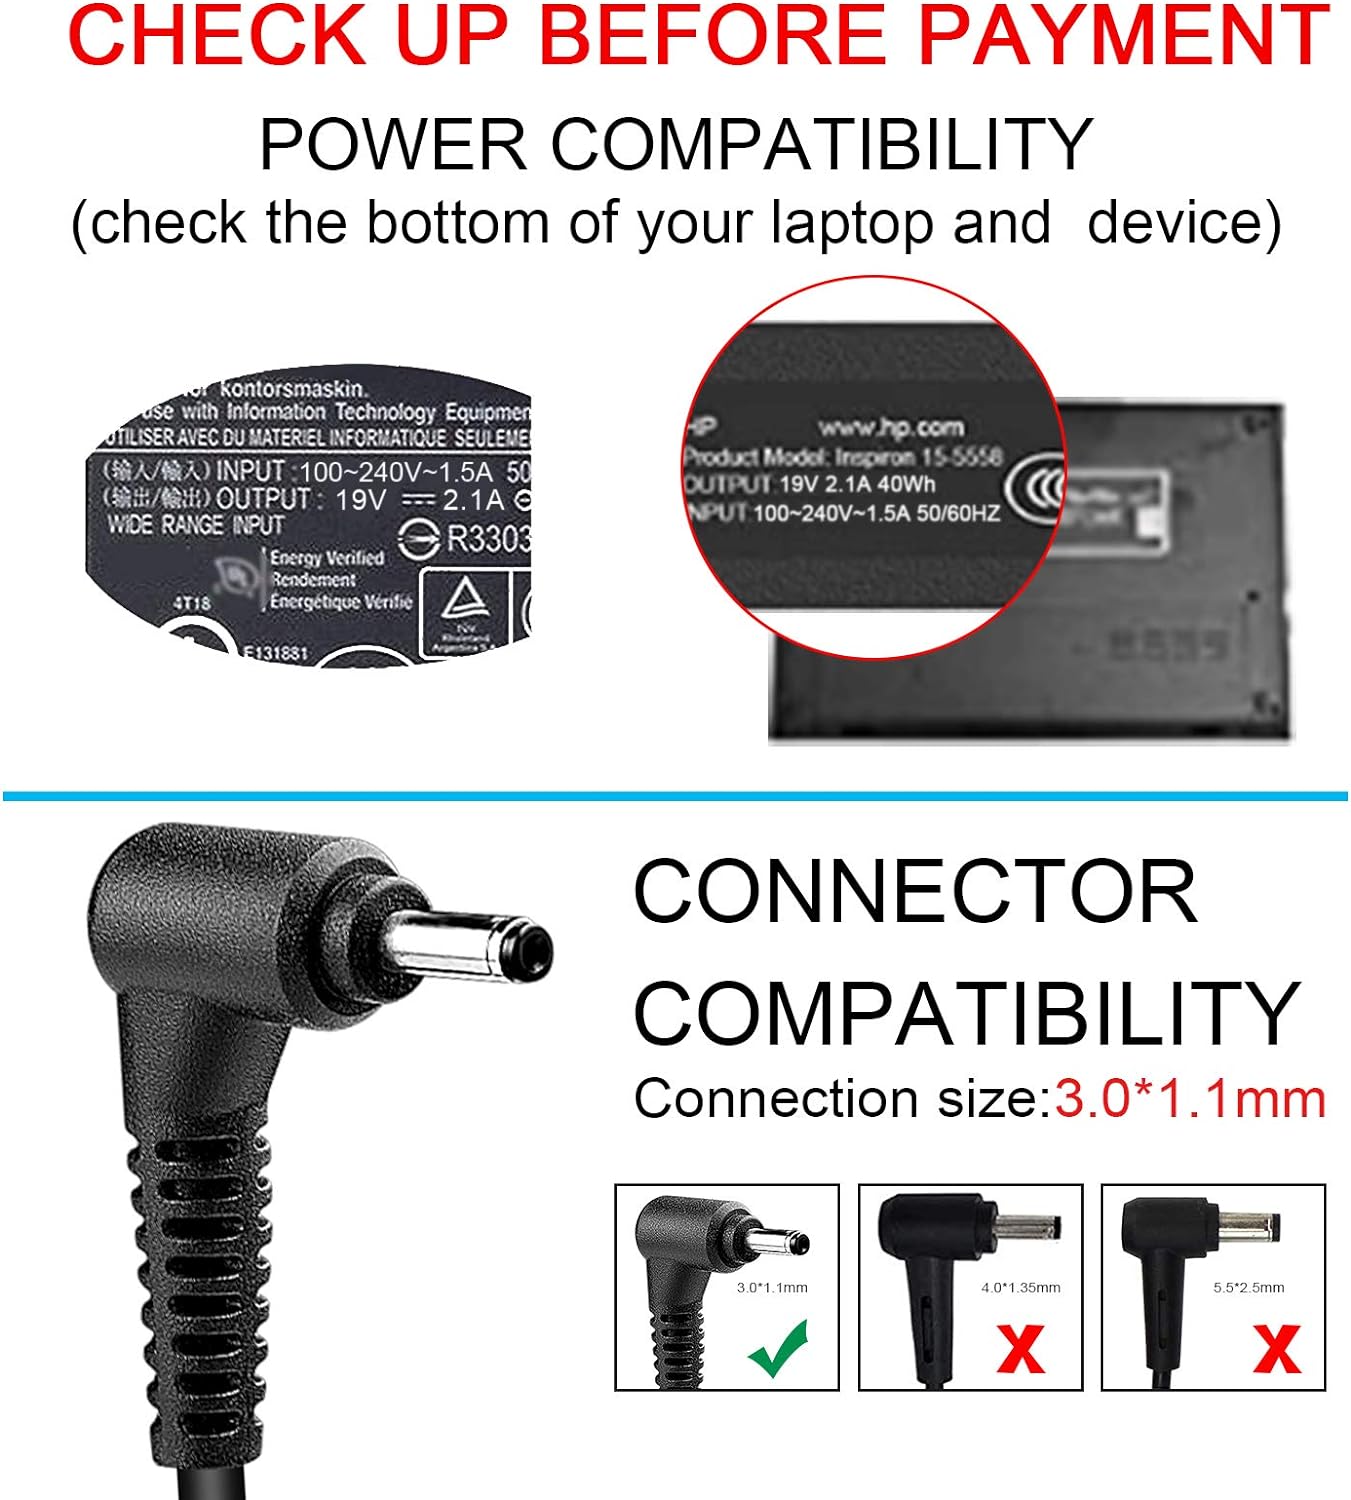 40W AC Charger for Samsung Galaxy View SM-T670 T677 18.4inches Tablet Connectivity Technology Barrel Connector Connecto